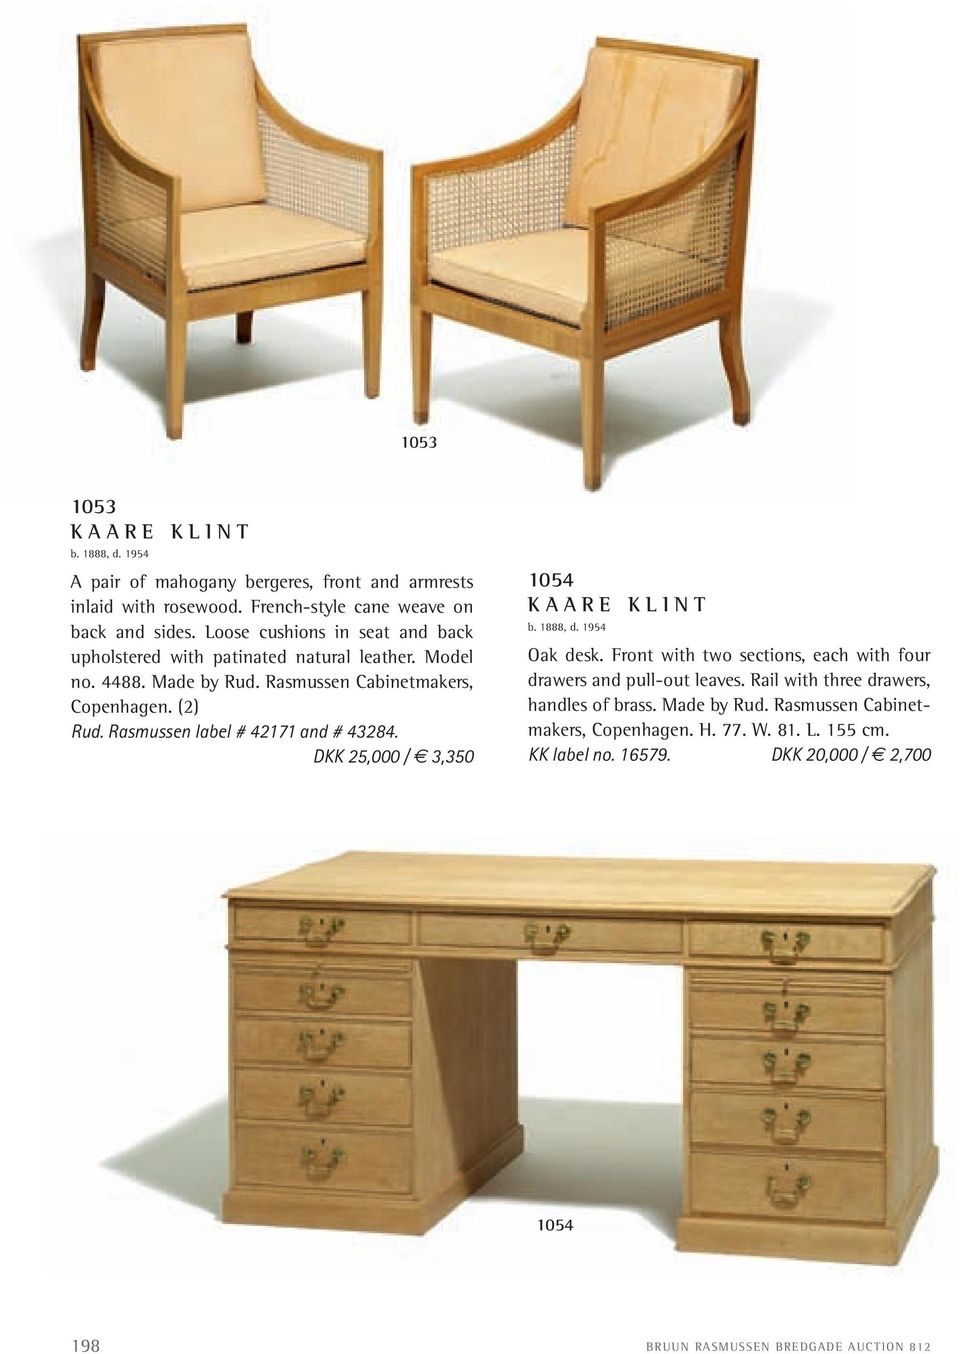 Rasmussen label # 42171 and # 43284. DKK 25,000 / 3,350 1054 K AAre Klint b. 1888, d. 1954 Oak desk. Front with two sections, each with four drawers and pull-out leaves.